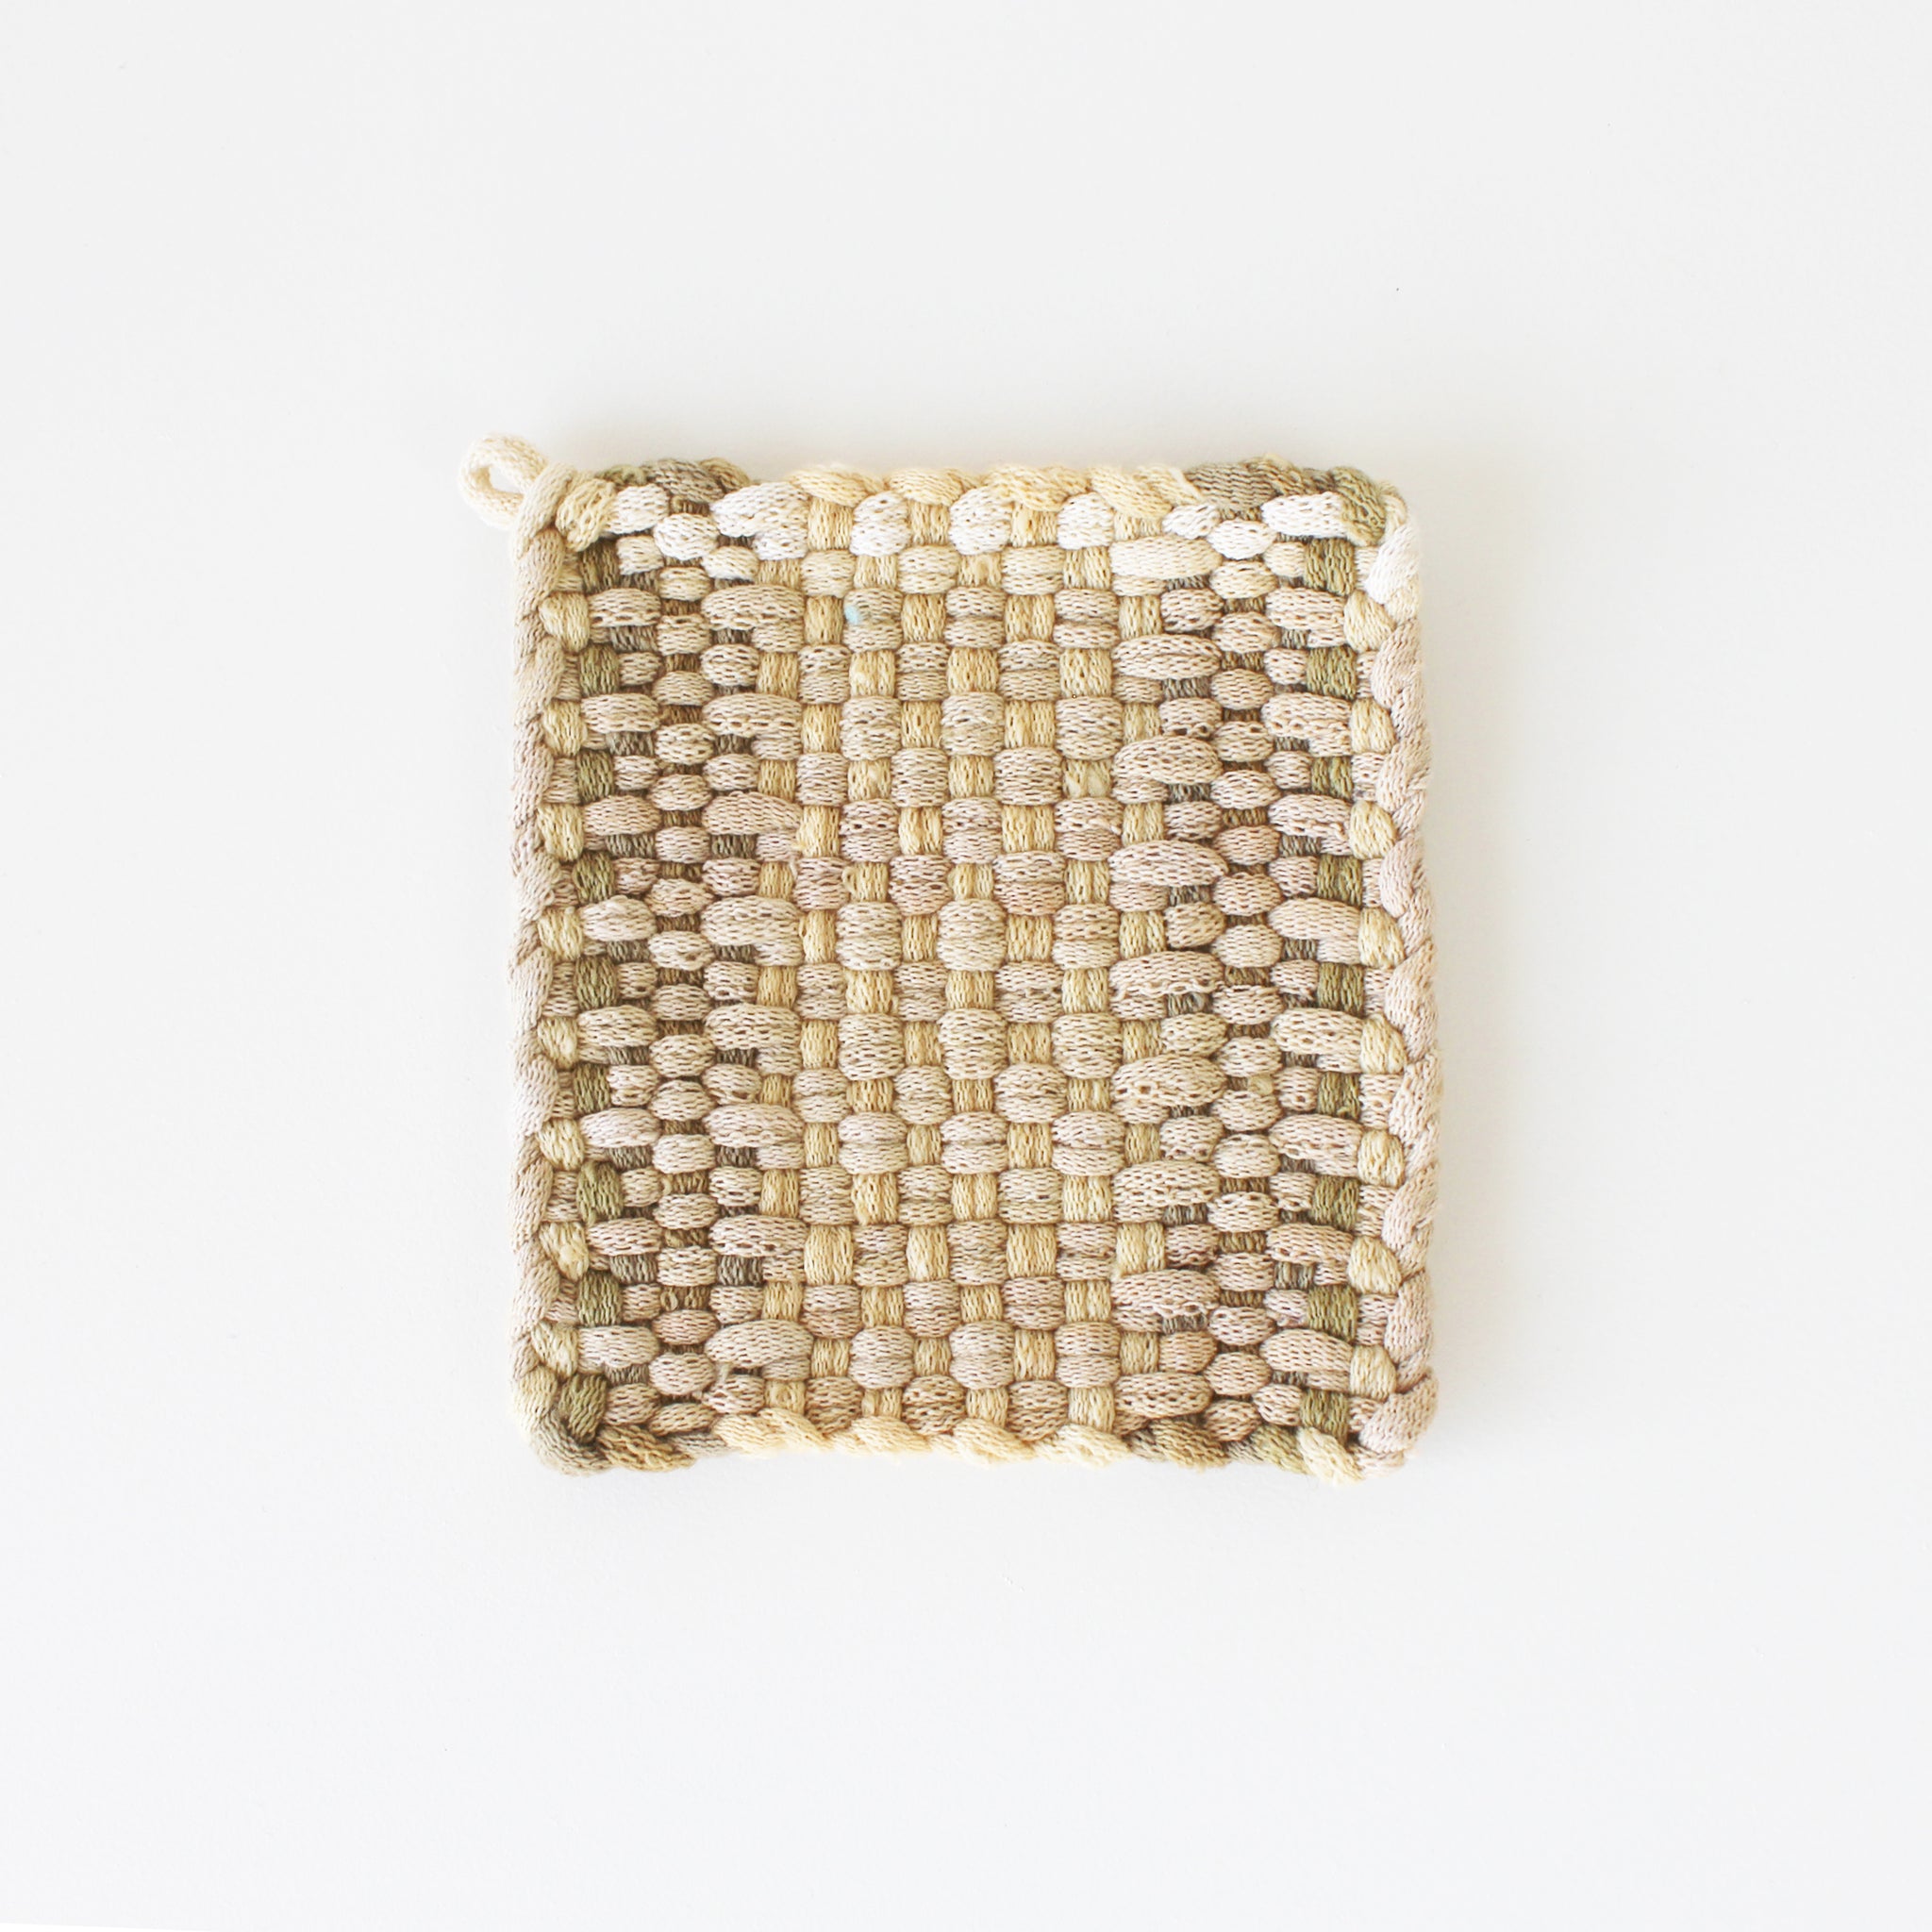 Handwoven Pot Holder - One of a Kind 5